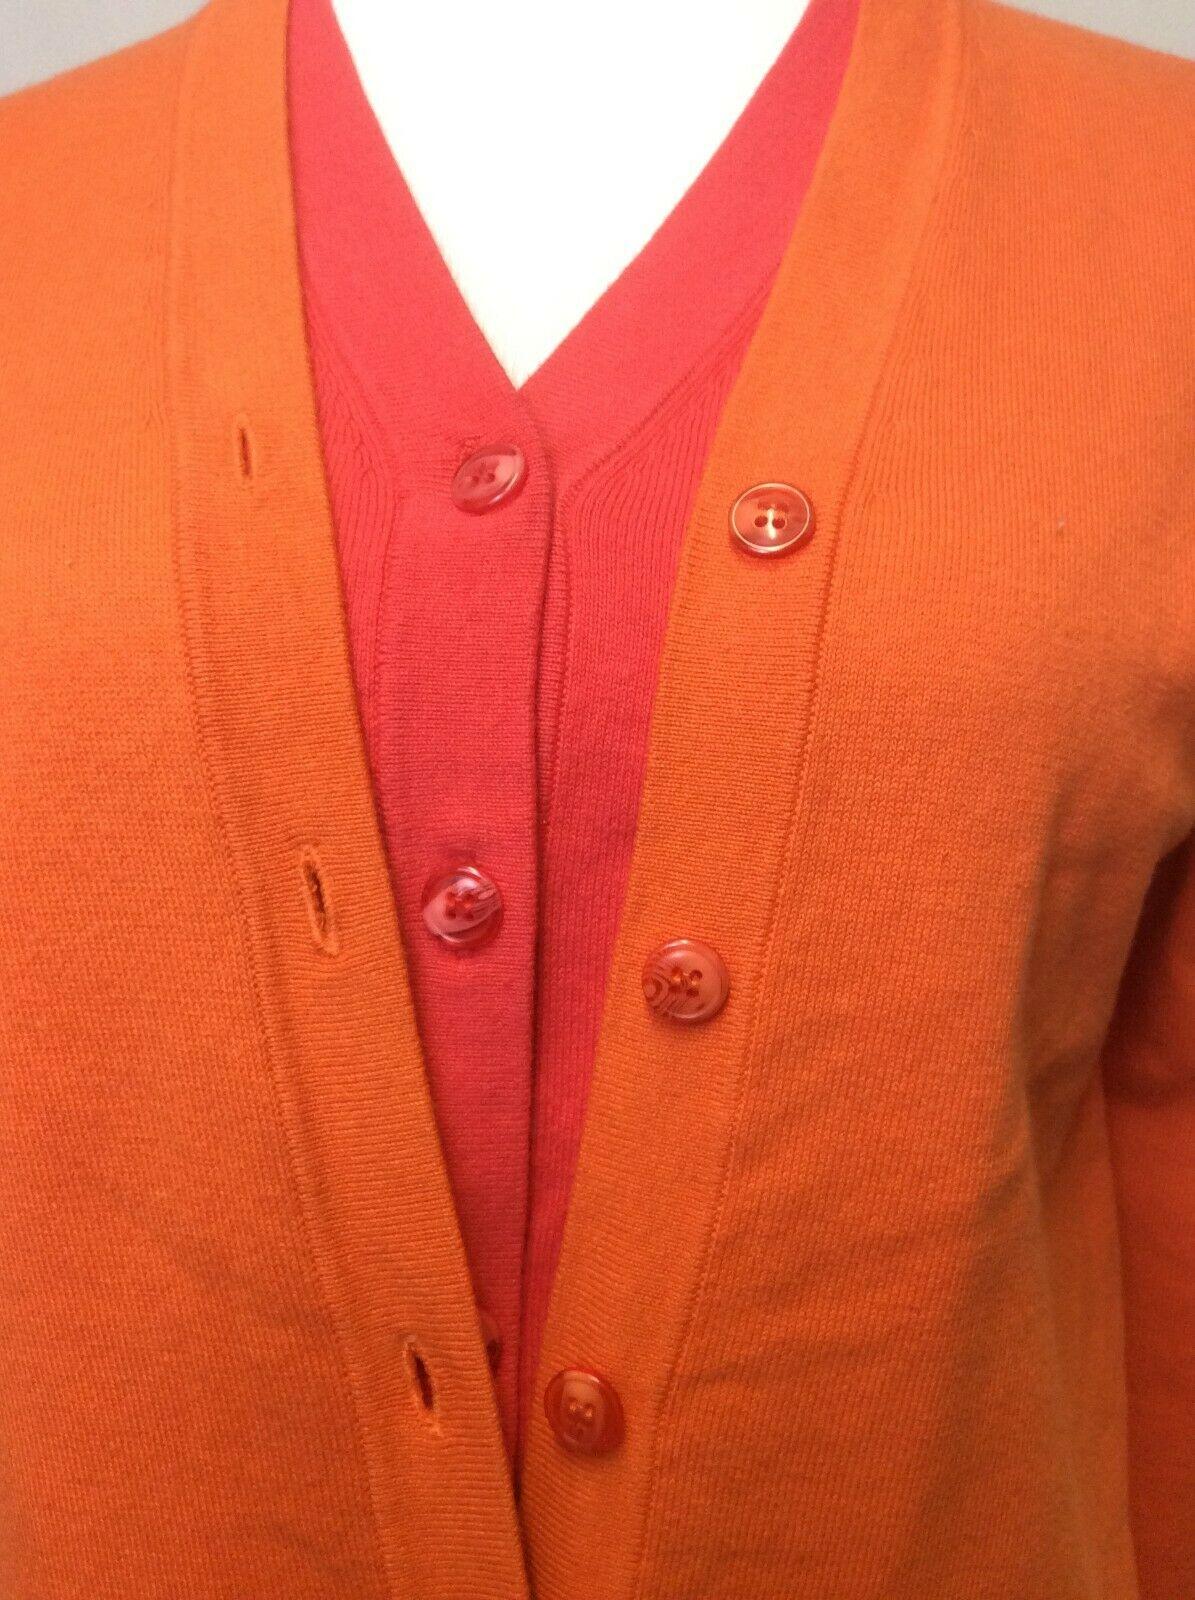 THALIAN XTRACT Womens Cotton Double Cardigan Double Color Orange Coral Size M - SVNYFancy